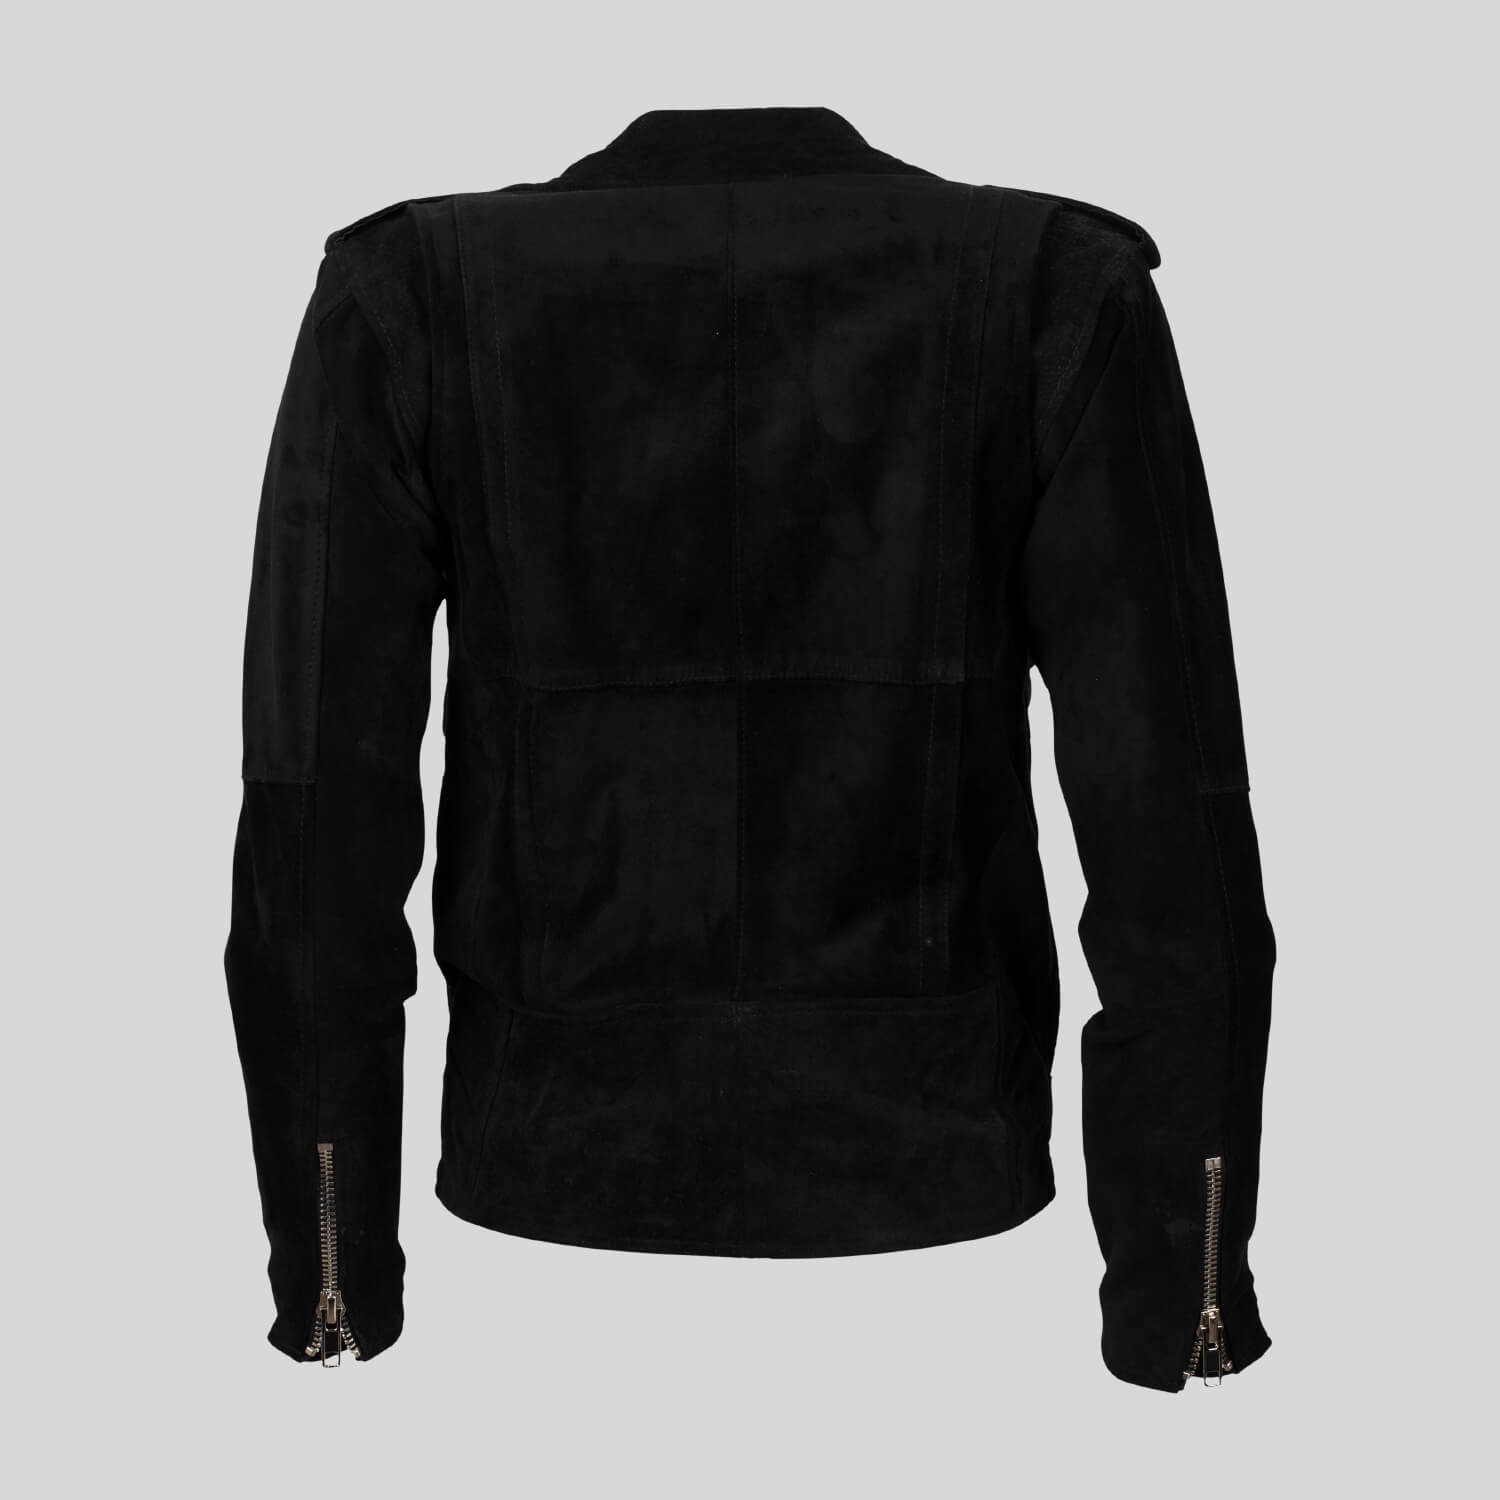 Buy Pelechecoco biker jacket made from sustainable leather